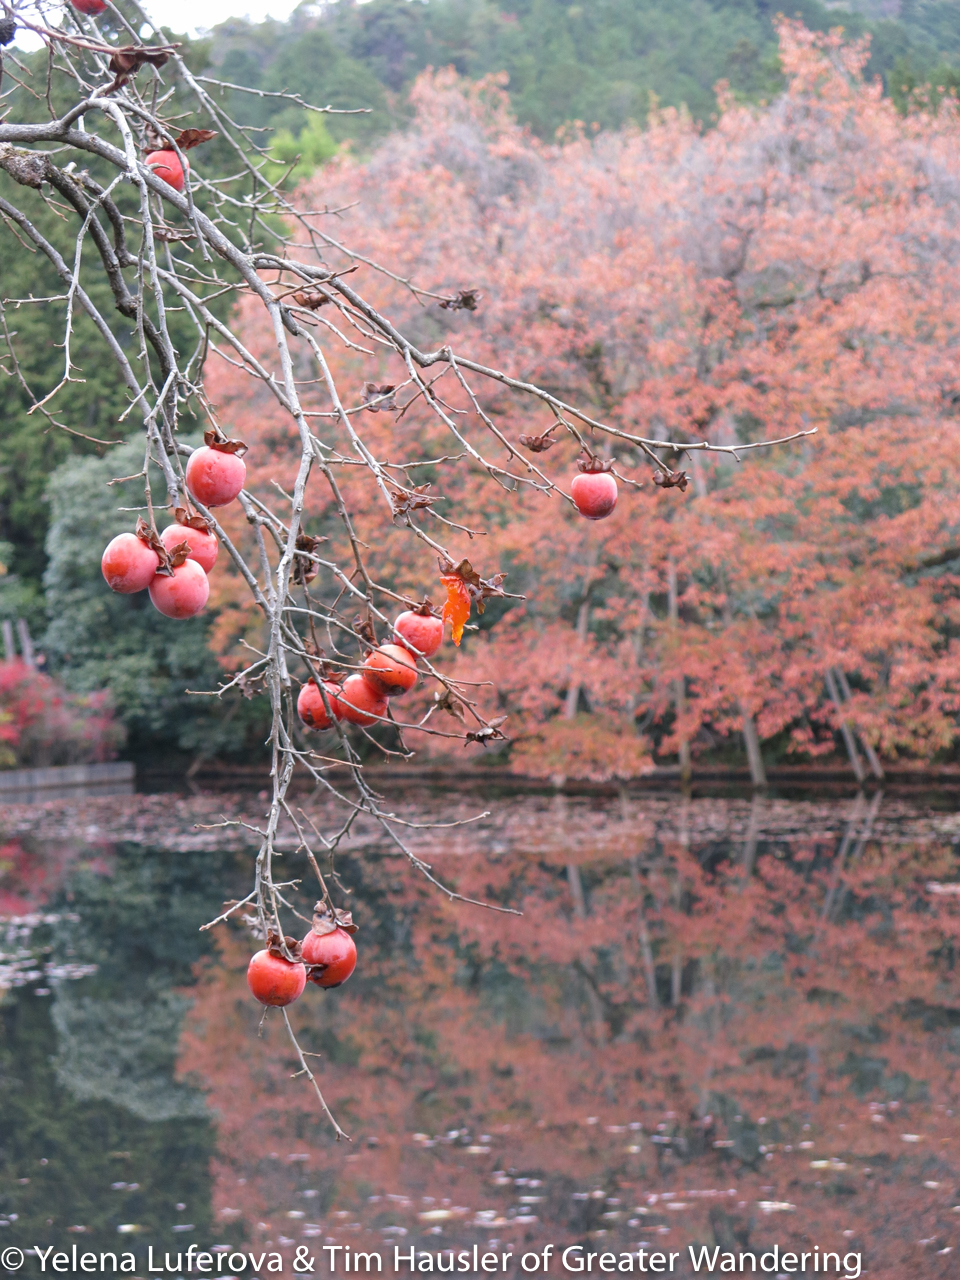 Persimmons in the Ryoanji temple gardens